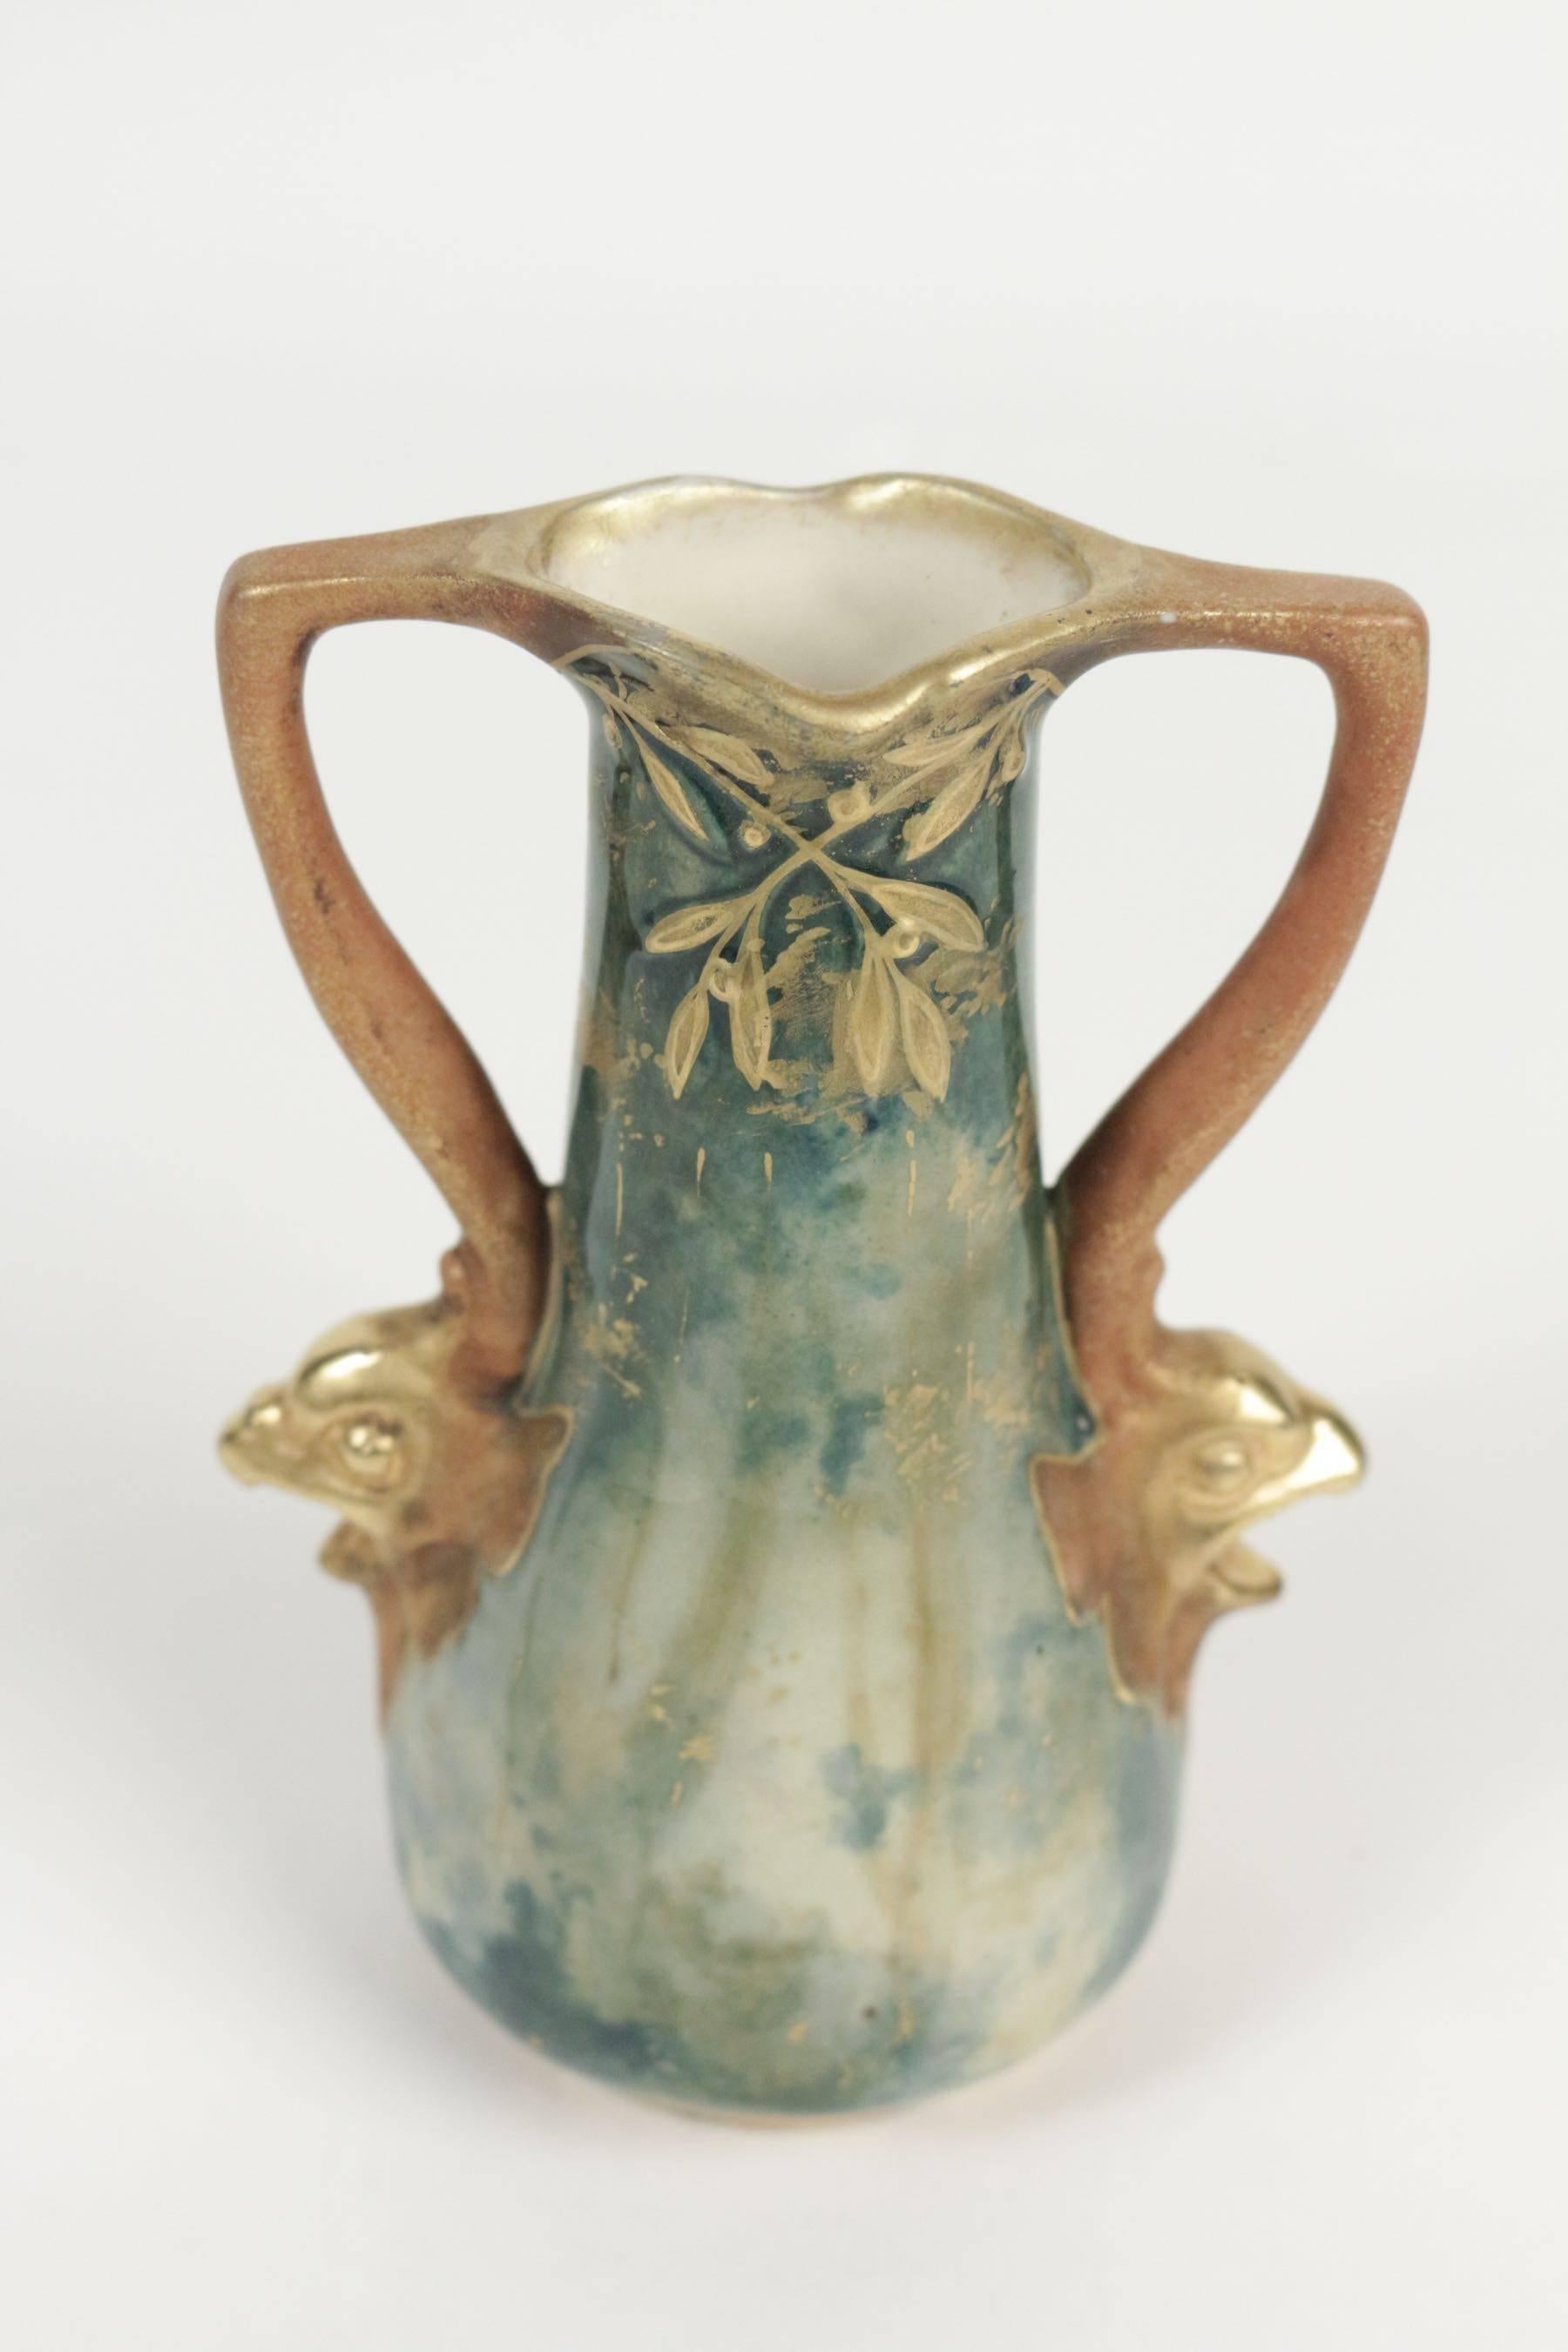 Amphora shaped earthenware vase, Viennese, Austria, circa 1900 with handles in shapes of fish.
 